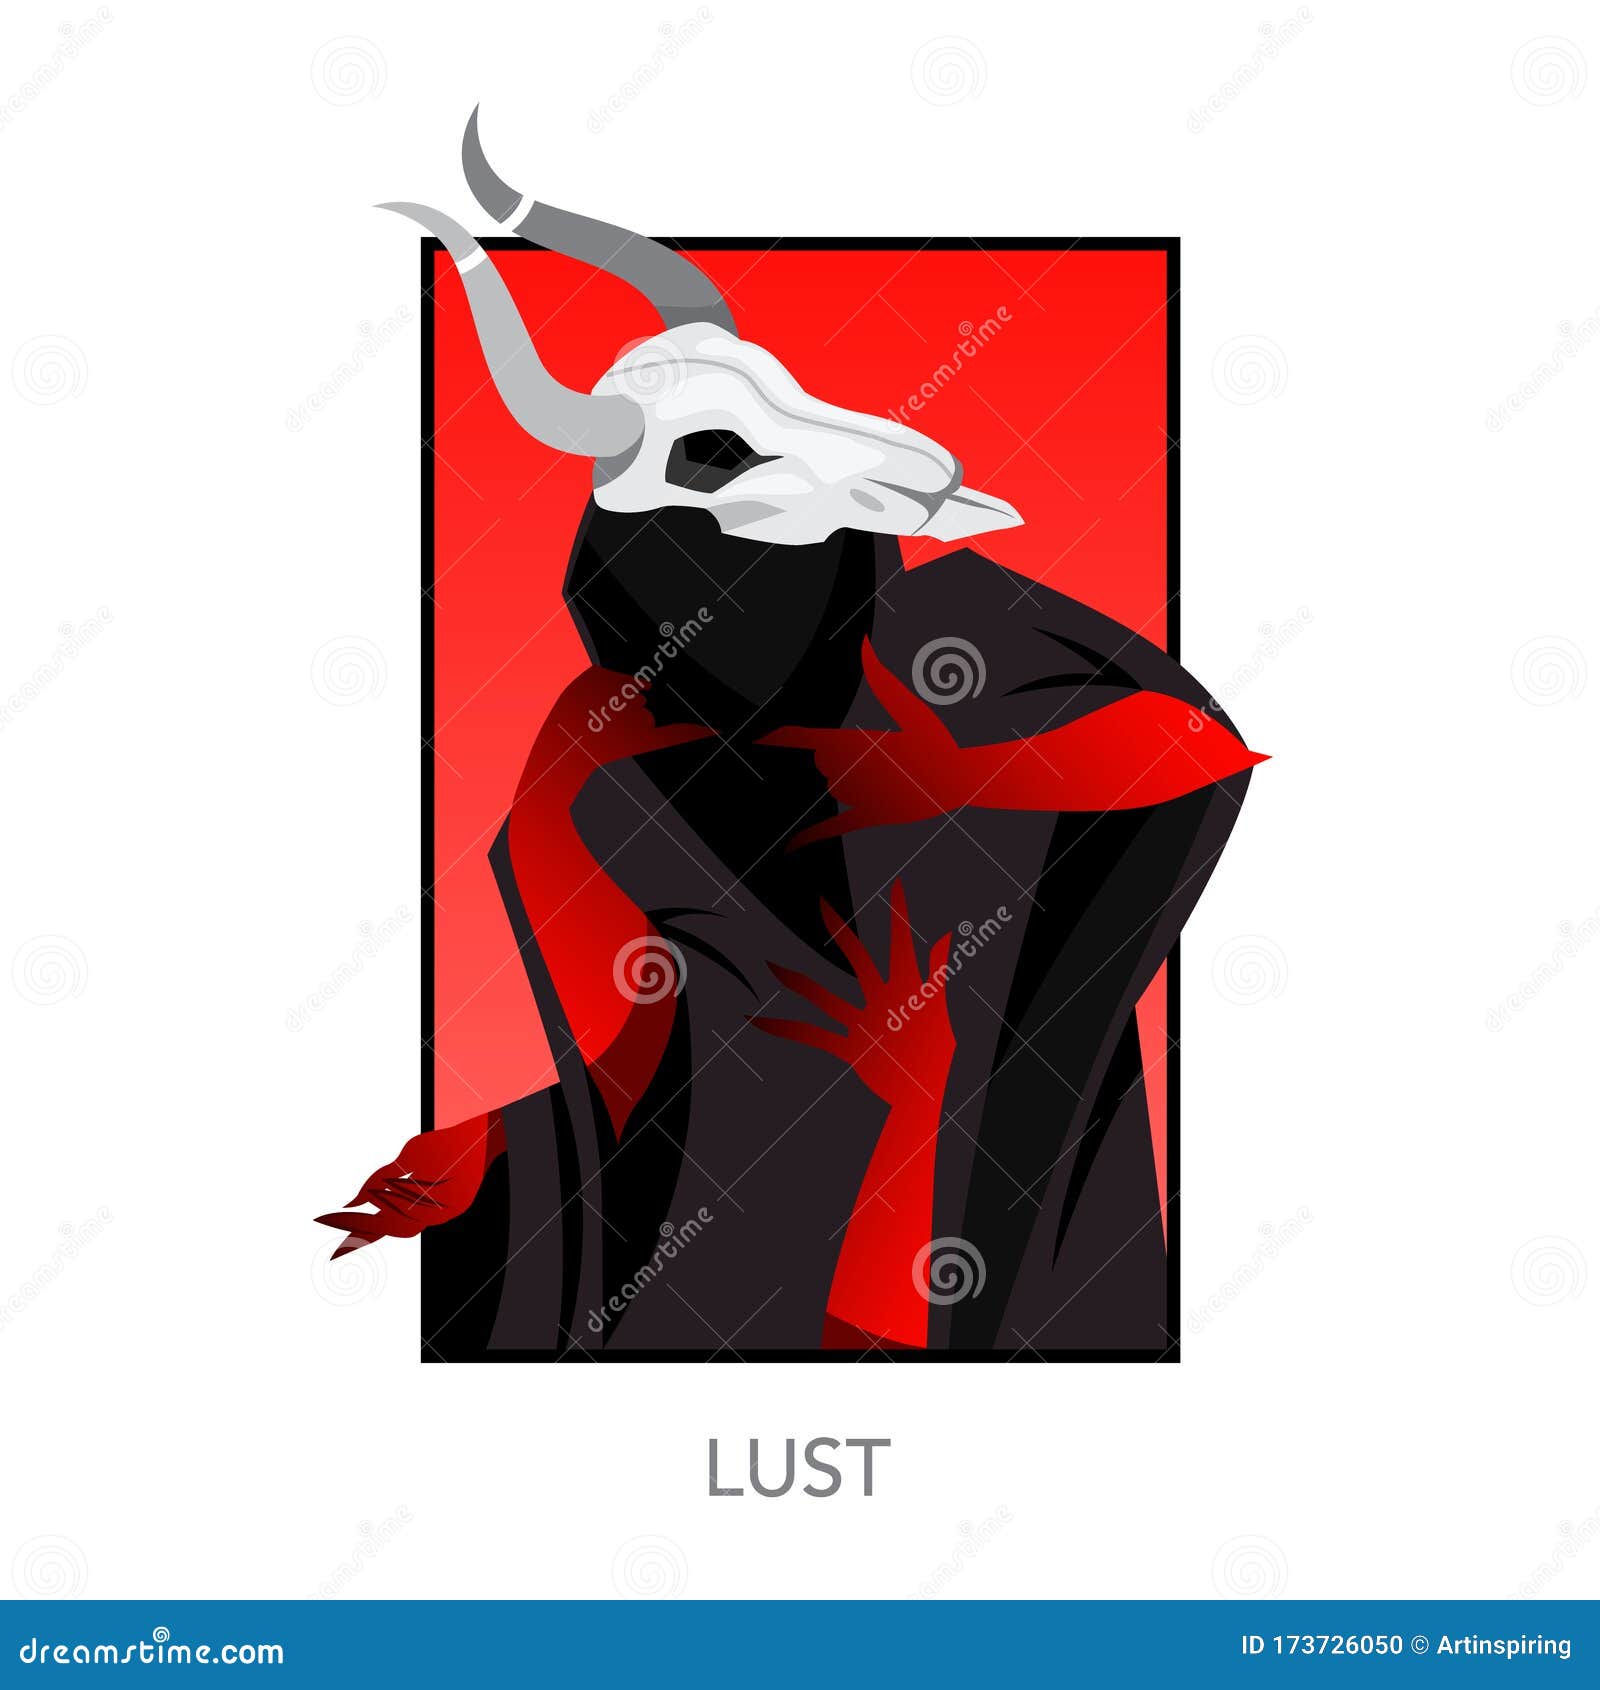 Who is the demon of lust